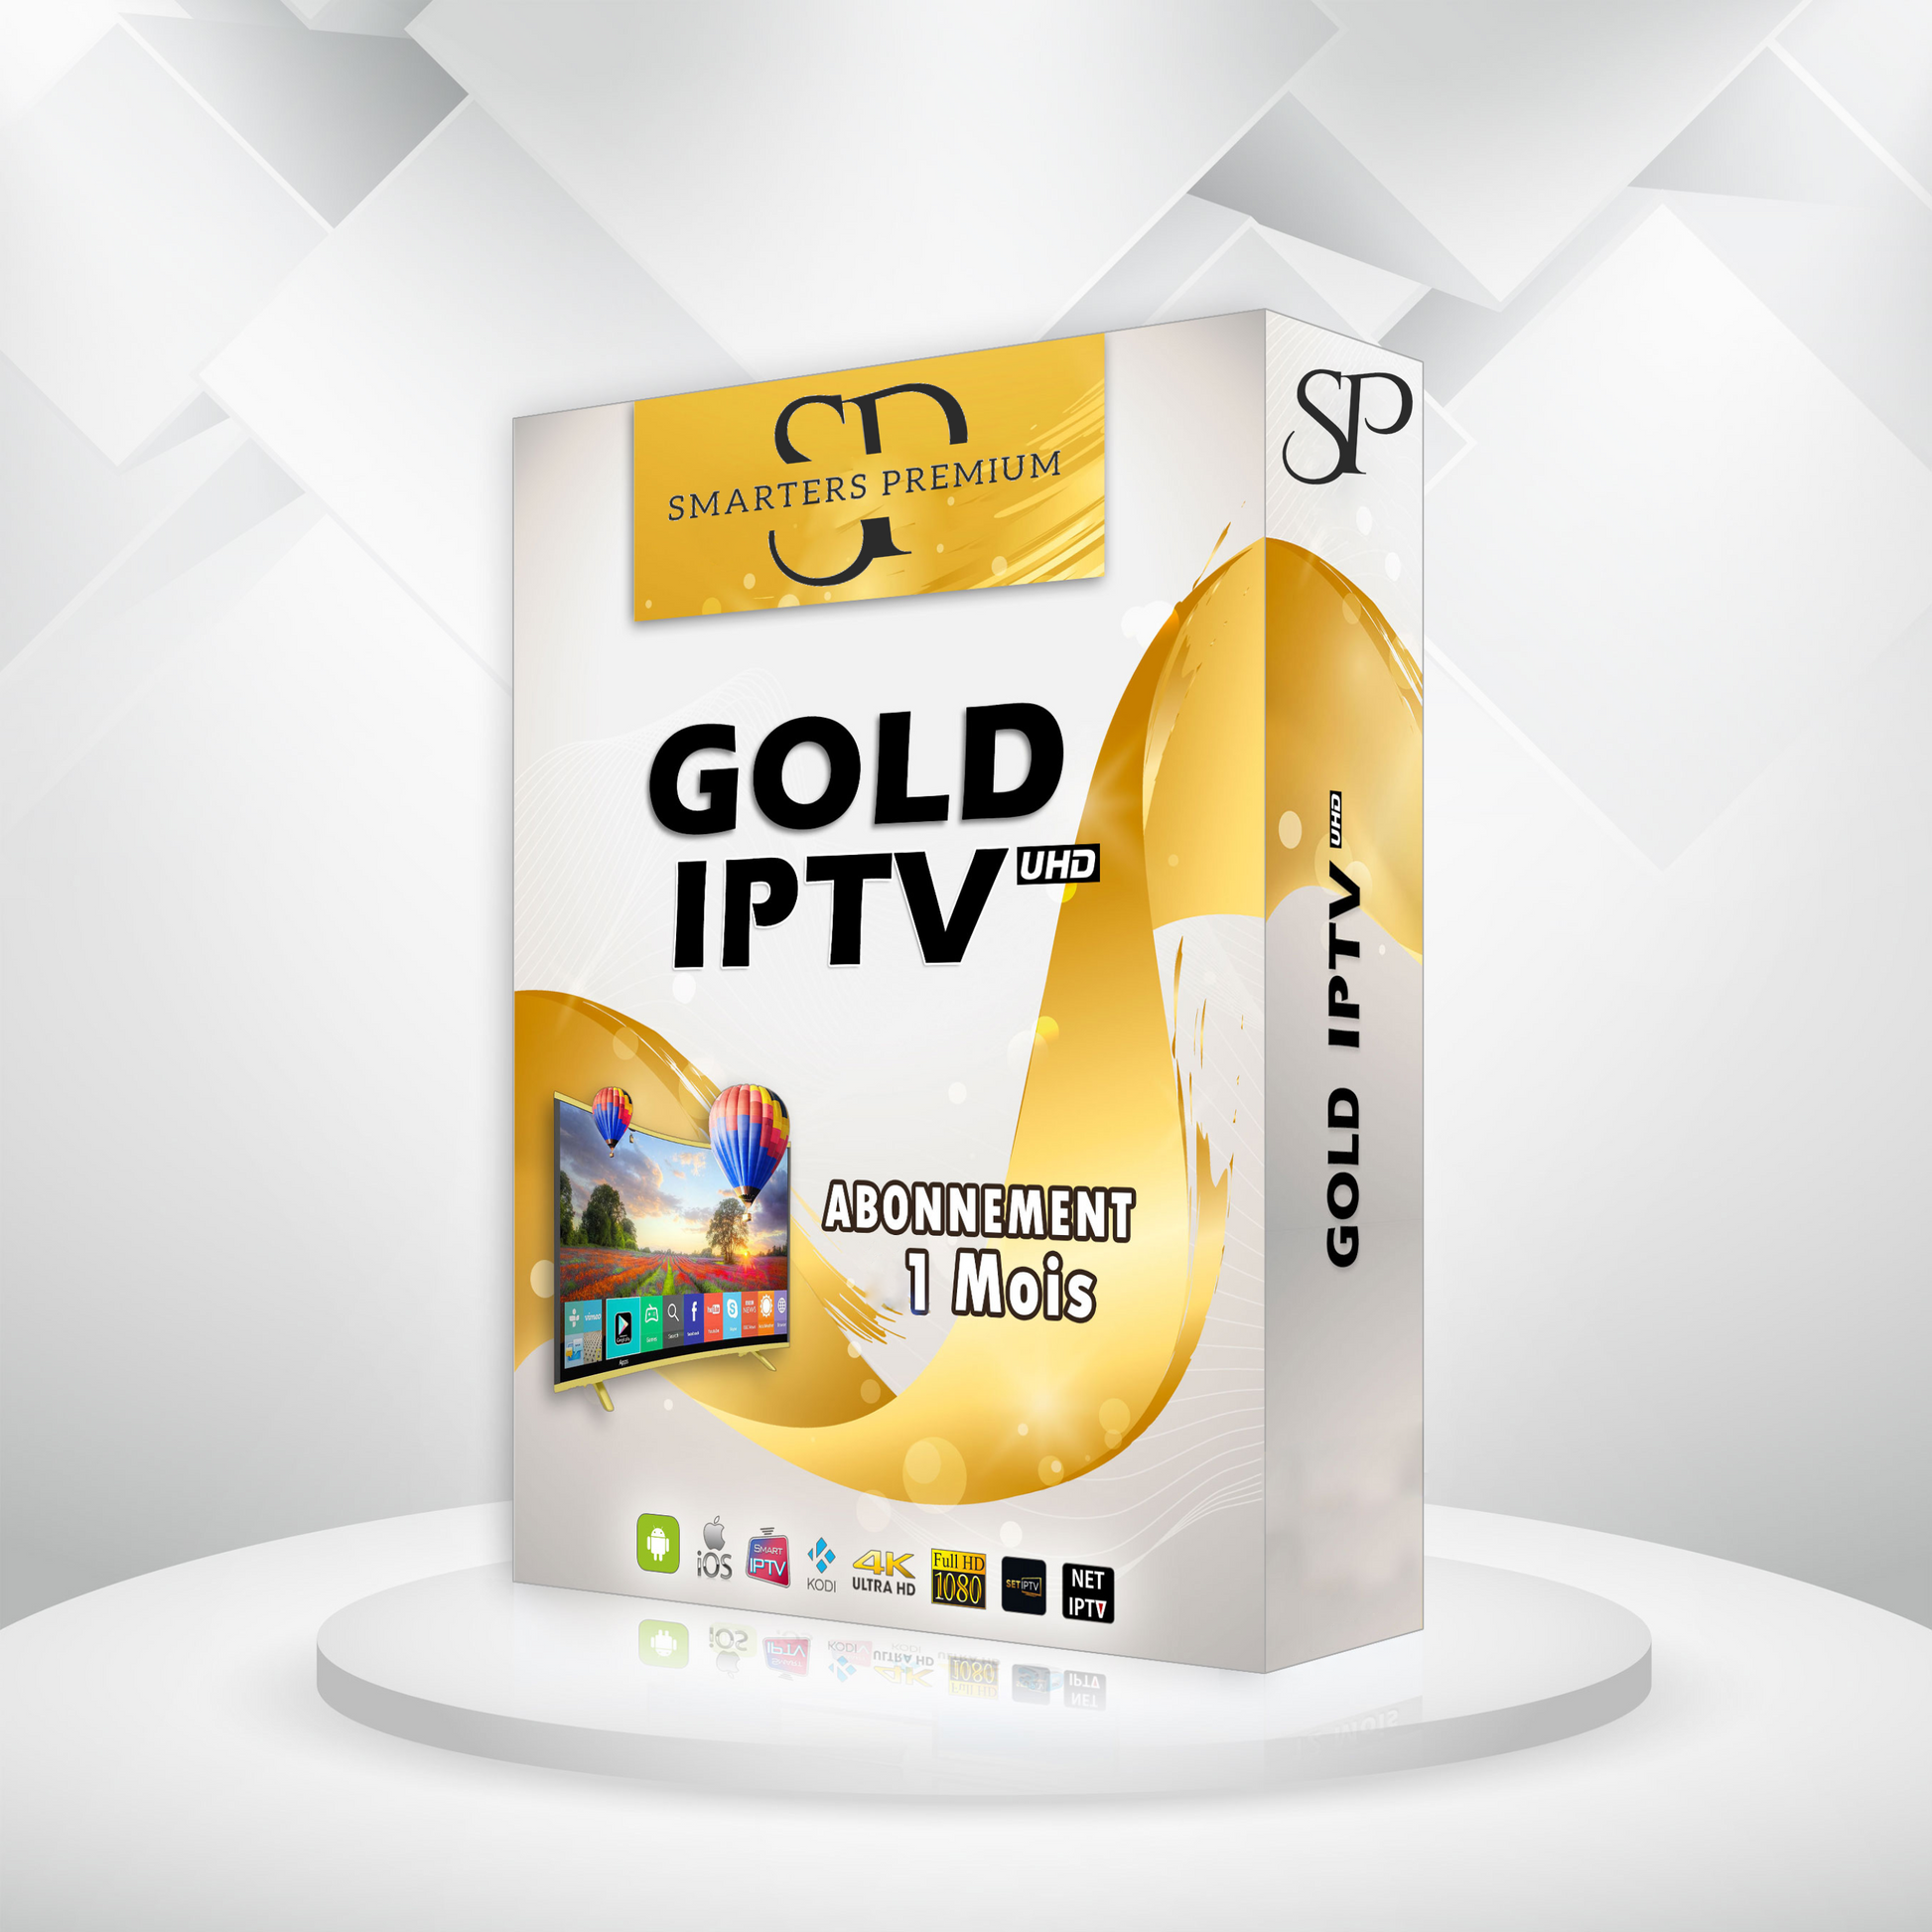 Image showing the IPTV Smarters Pro subscription package for 12 months, featuring a sleek design and prominent branding.